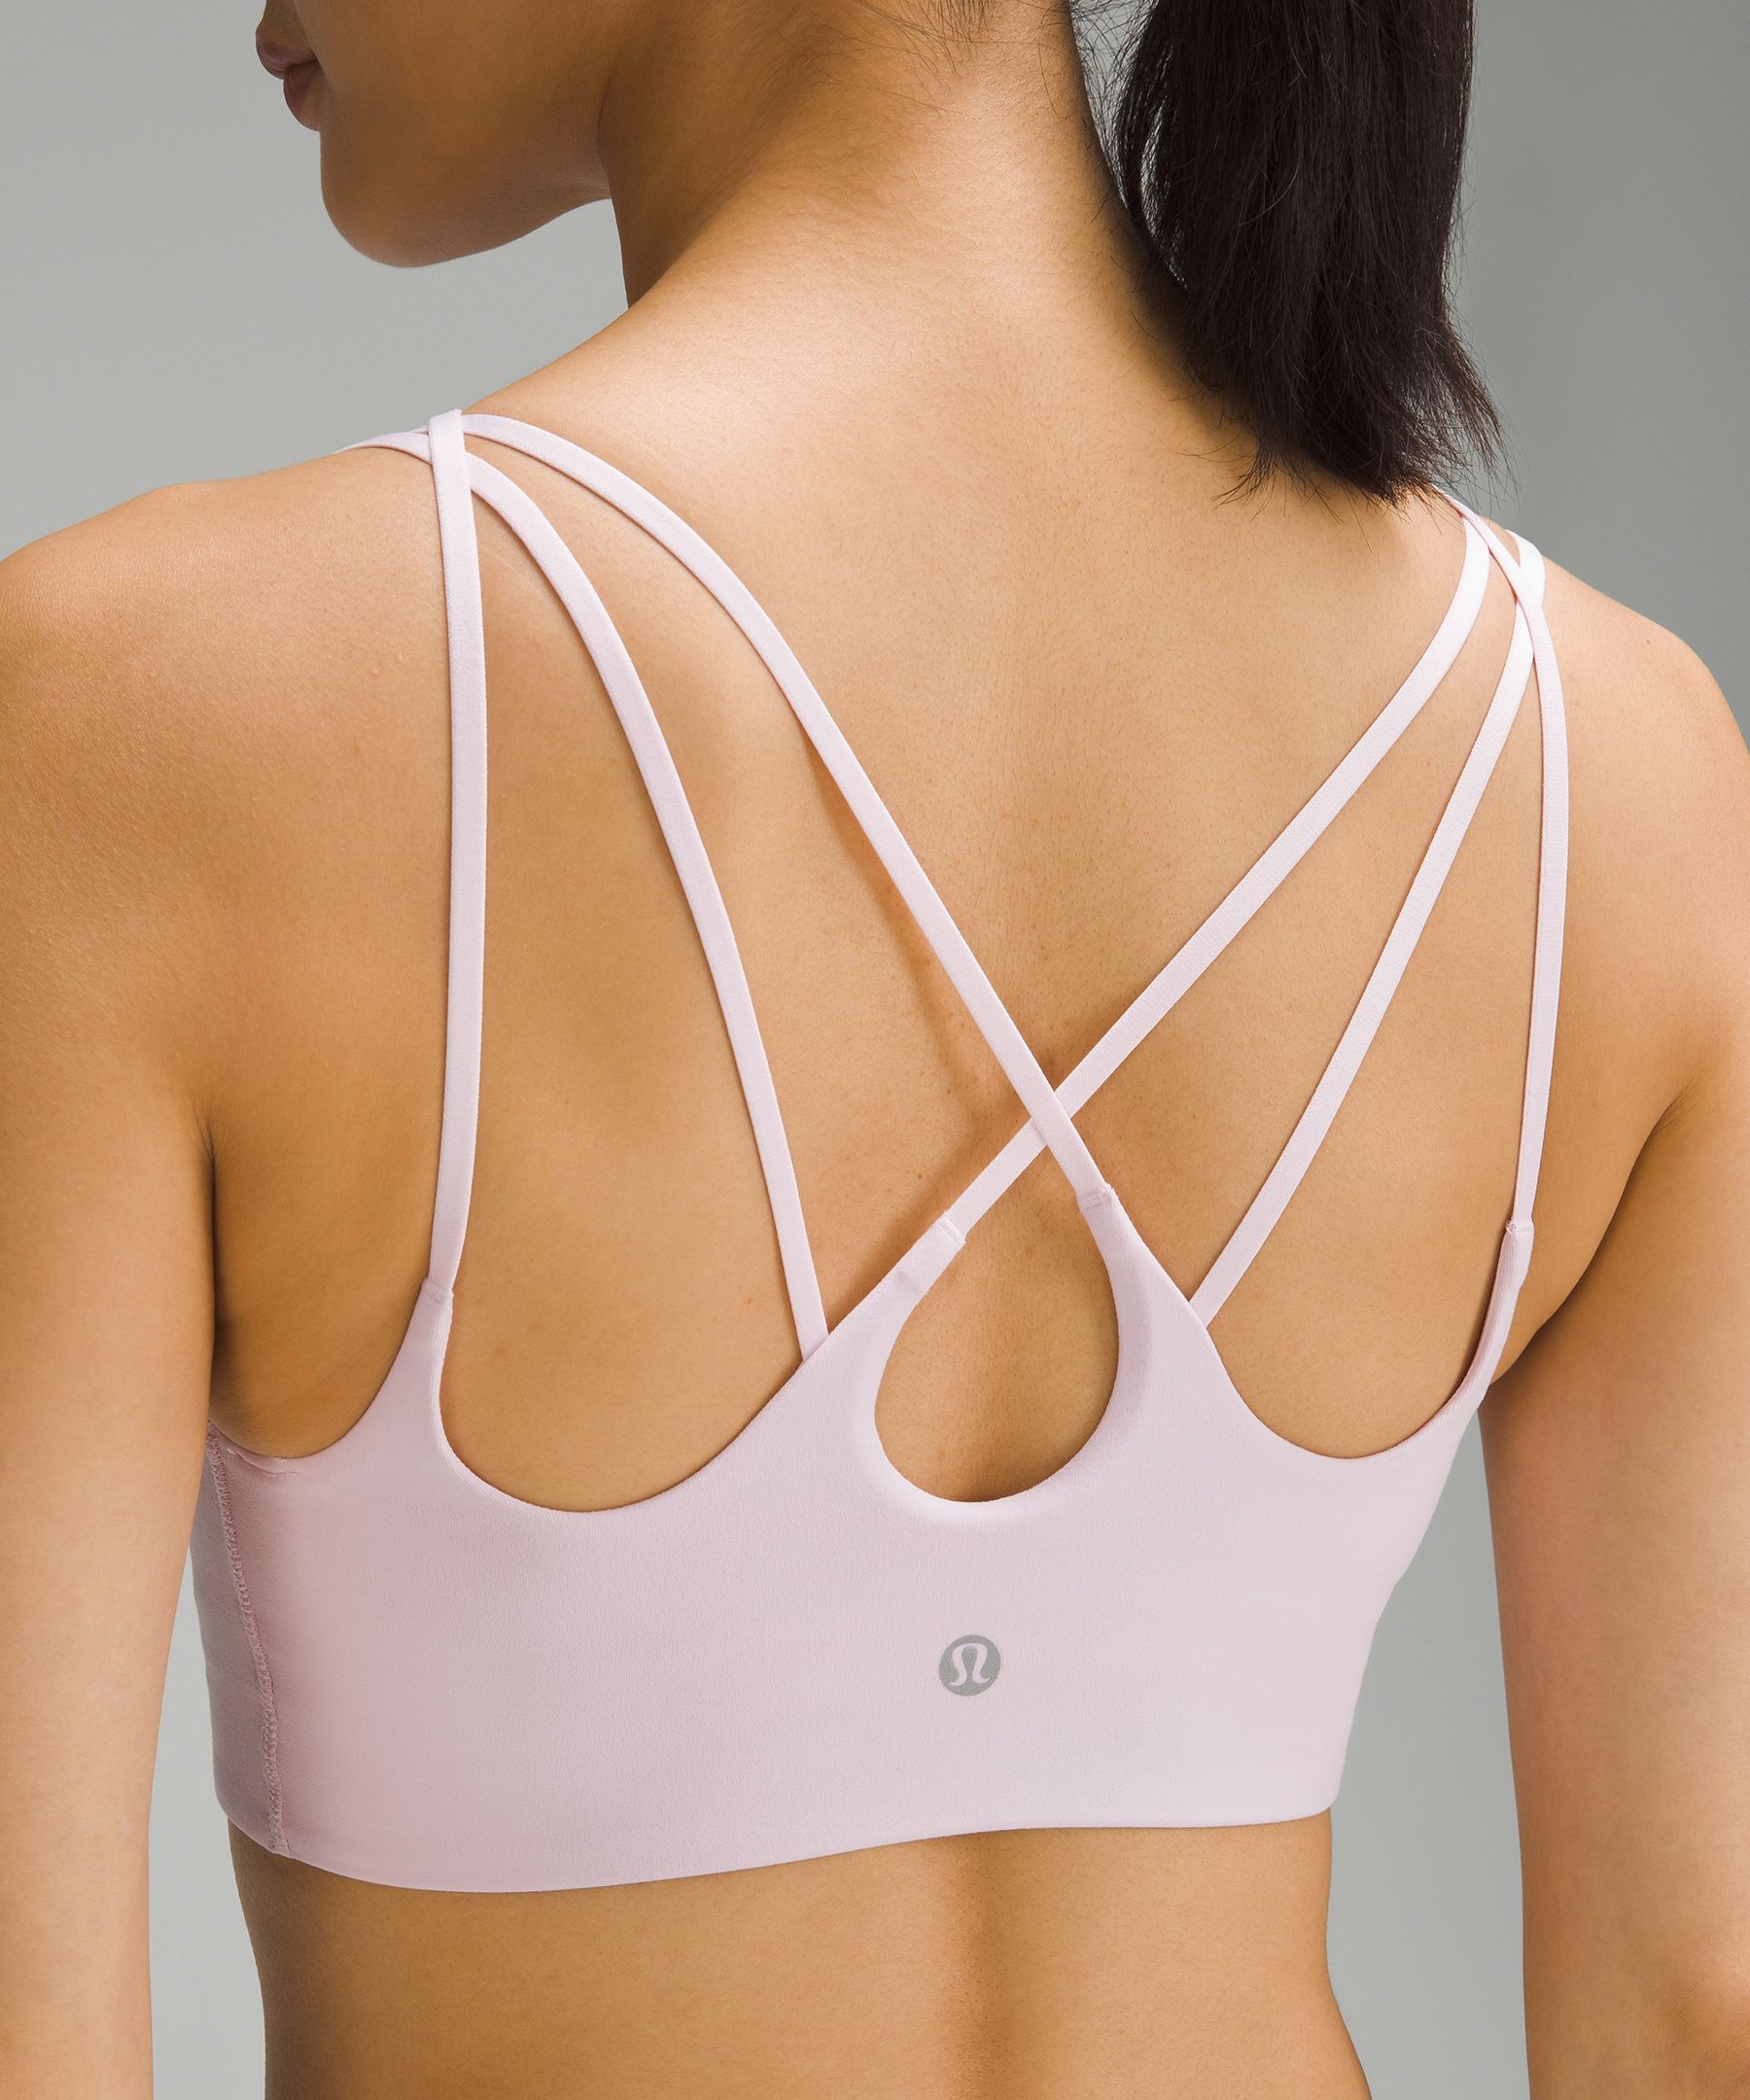 Ribbed Nulu Strappy Yoga Bra *Light Support, A/B Cup, Women's Bras